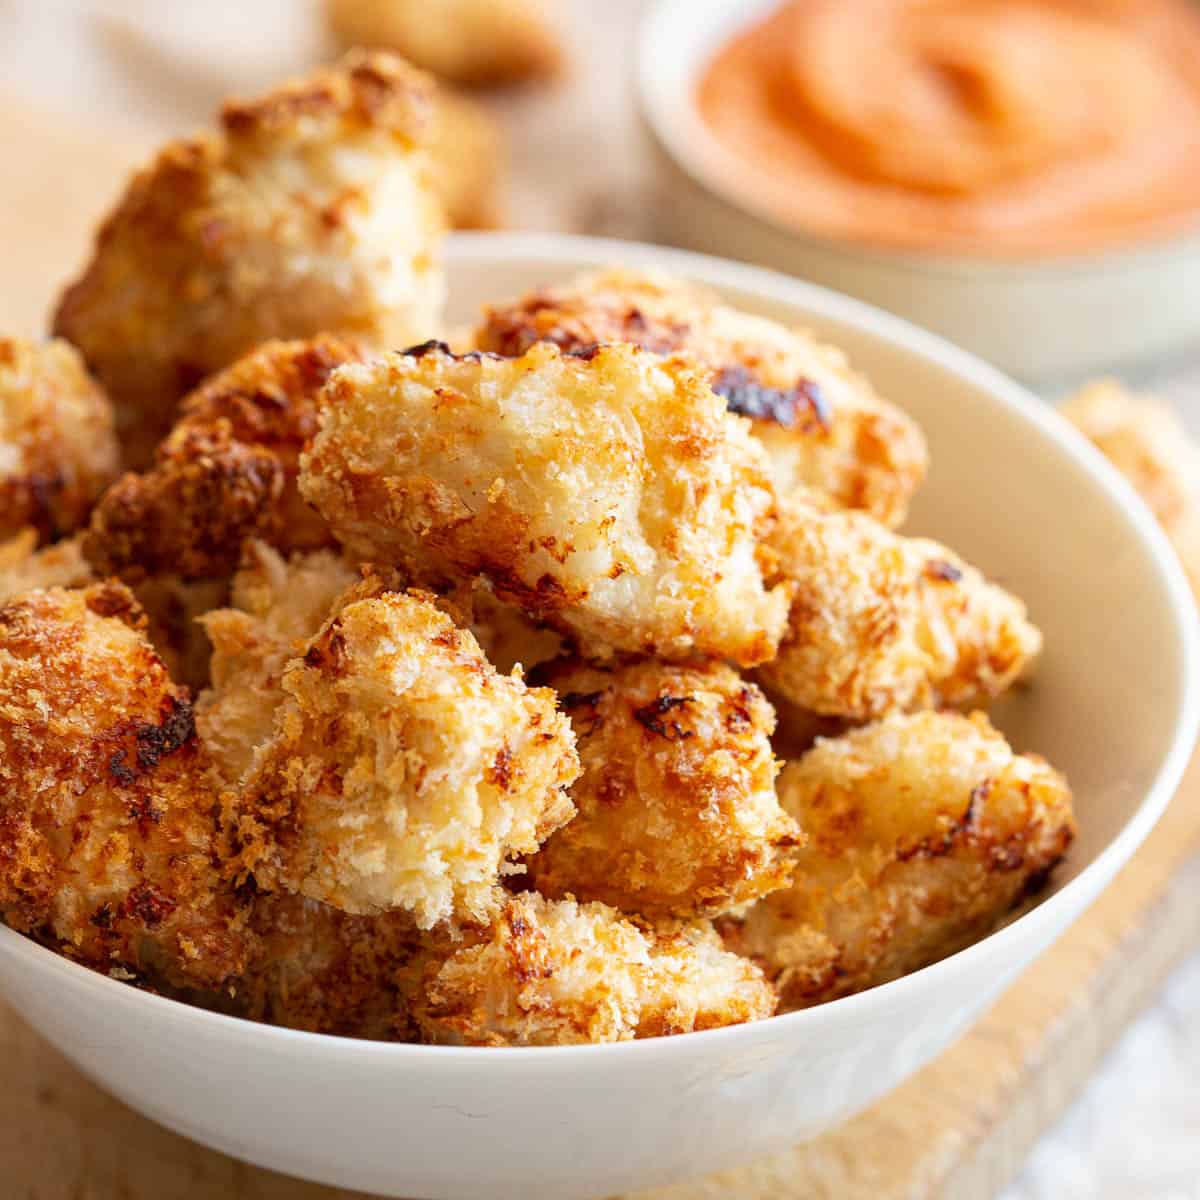 Bowl of crispy air fryer popcorn chicken with dipping sauce in background.